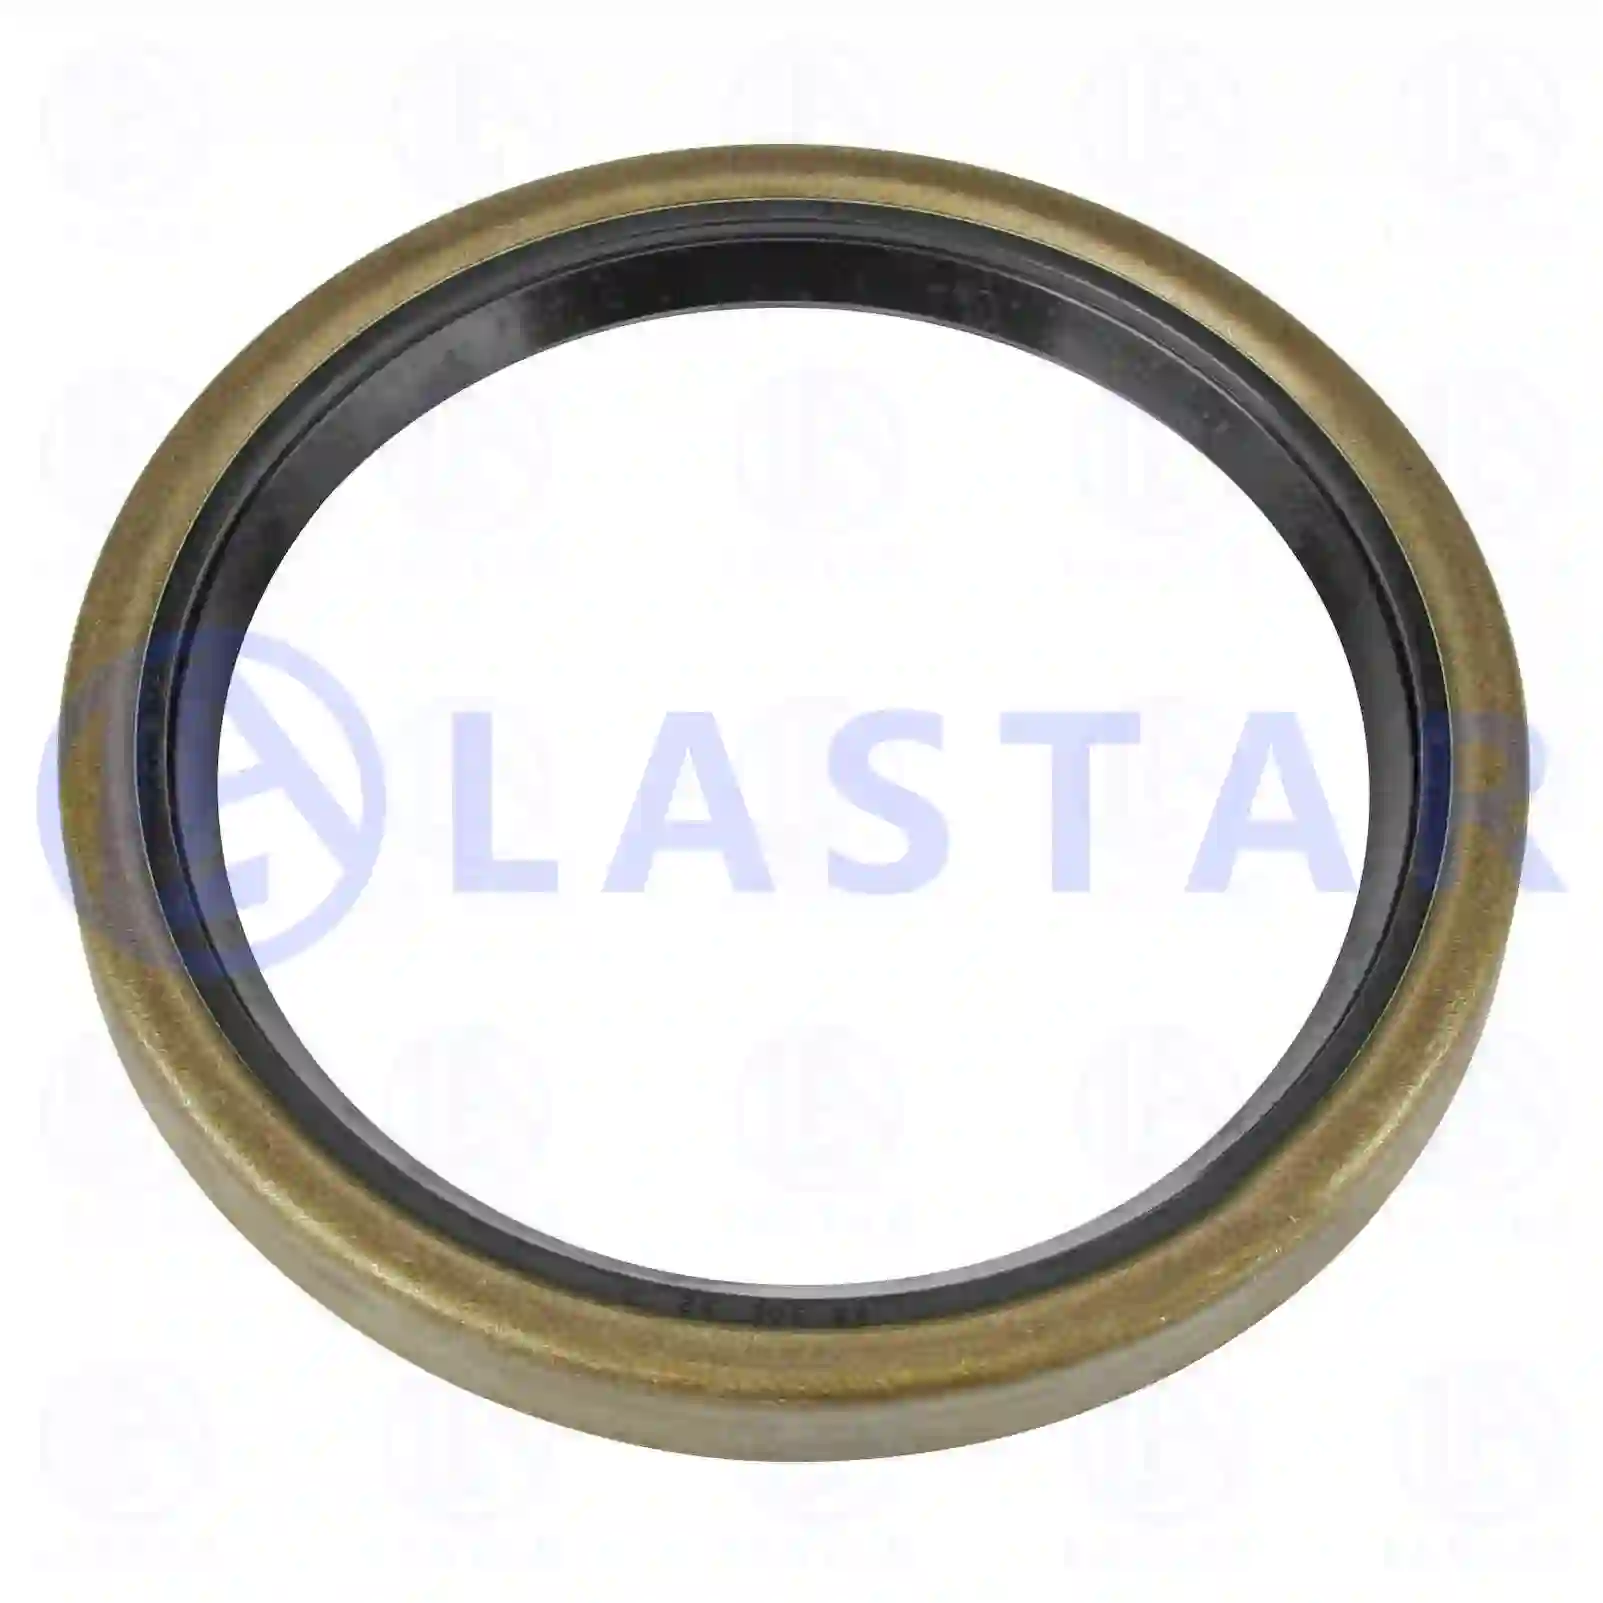 Oil seal, 77731931, 0069978847, 06562890132, 81965010446, 81965020247, 90900940712, 0049970646, 0049978547, 0069978847, 0119974347, 0119978547, 880221362, 99100290704, 99112290703, 1139840 ||  77731931 Lastar Spare Part | Truck Spare Parts, Auotomotive Spare Parts Oil seal, 77731931, 0069978847, 06562890132, 81965010446, 81965020247, 90900940712, 0049970646, 0049978547, 0069978847, 0119974347, 0119978547, 880221362, 99100290704, 99112290703, 1139840 ||  77731931 Lastar Spare Part | Truck Spare Parts, Auotomotive Spare Parts